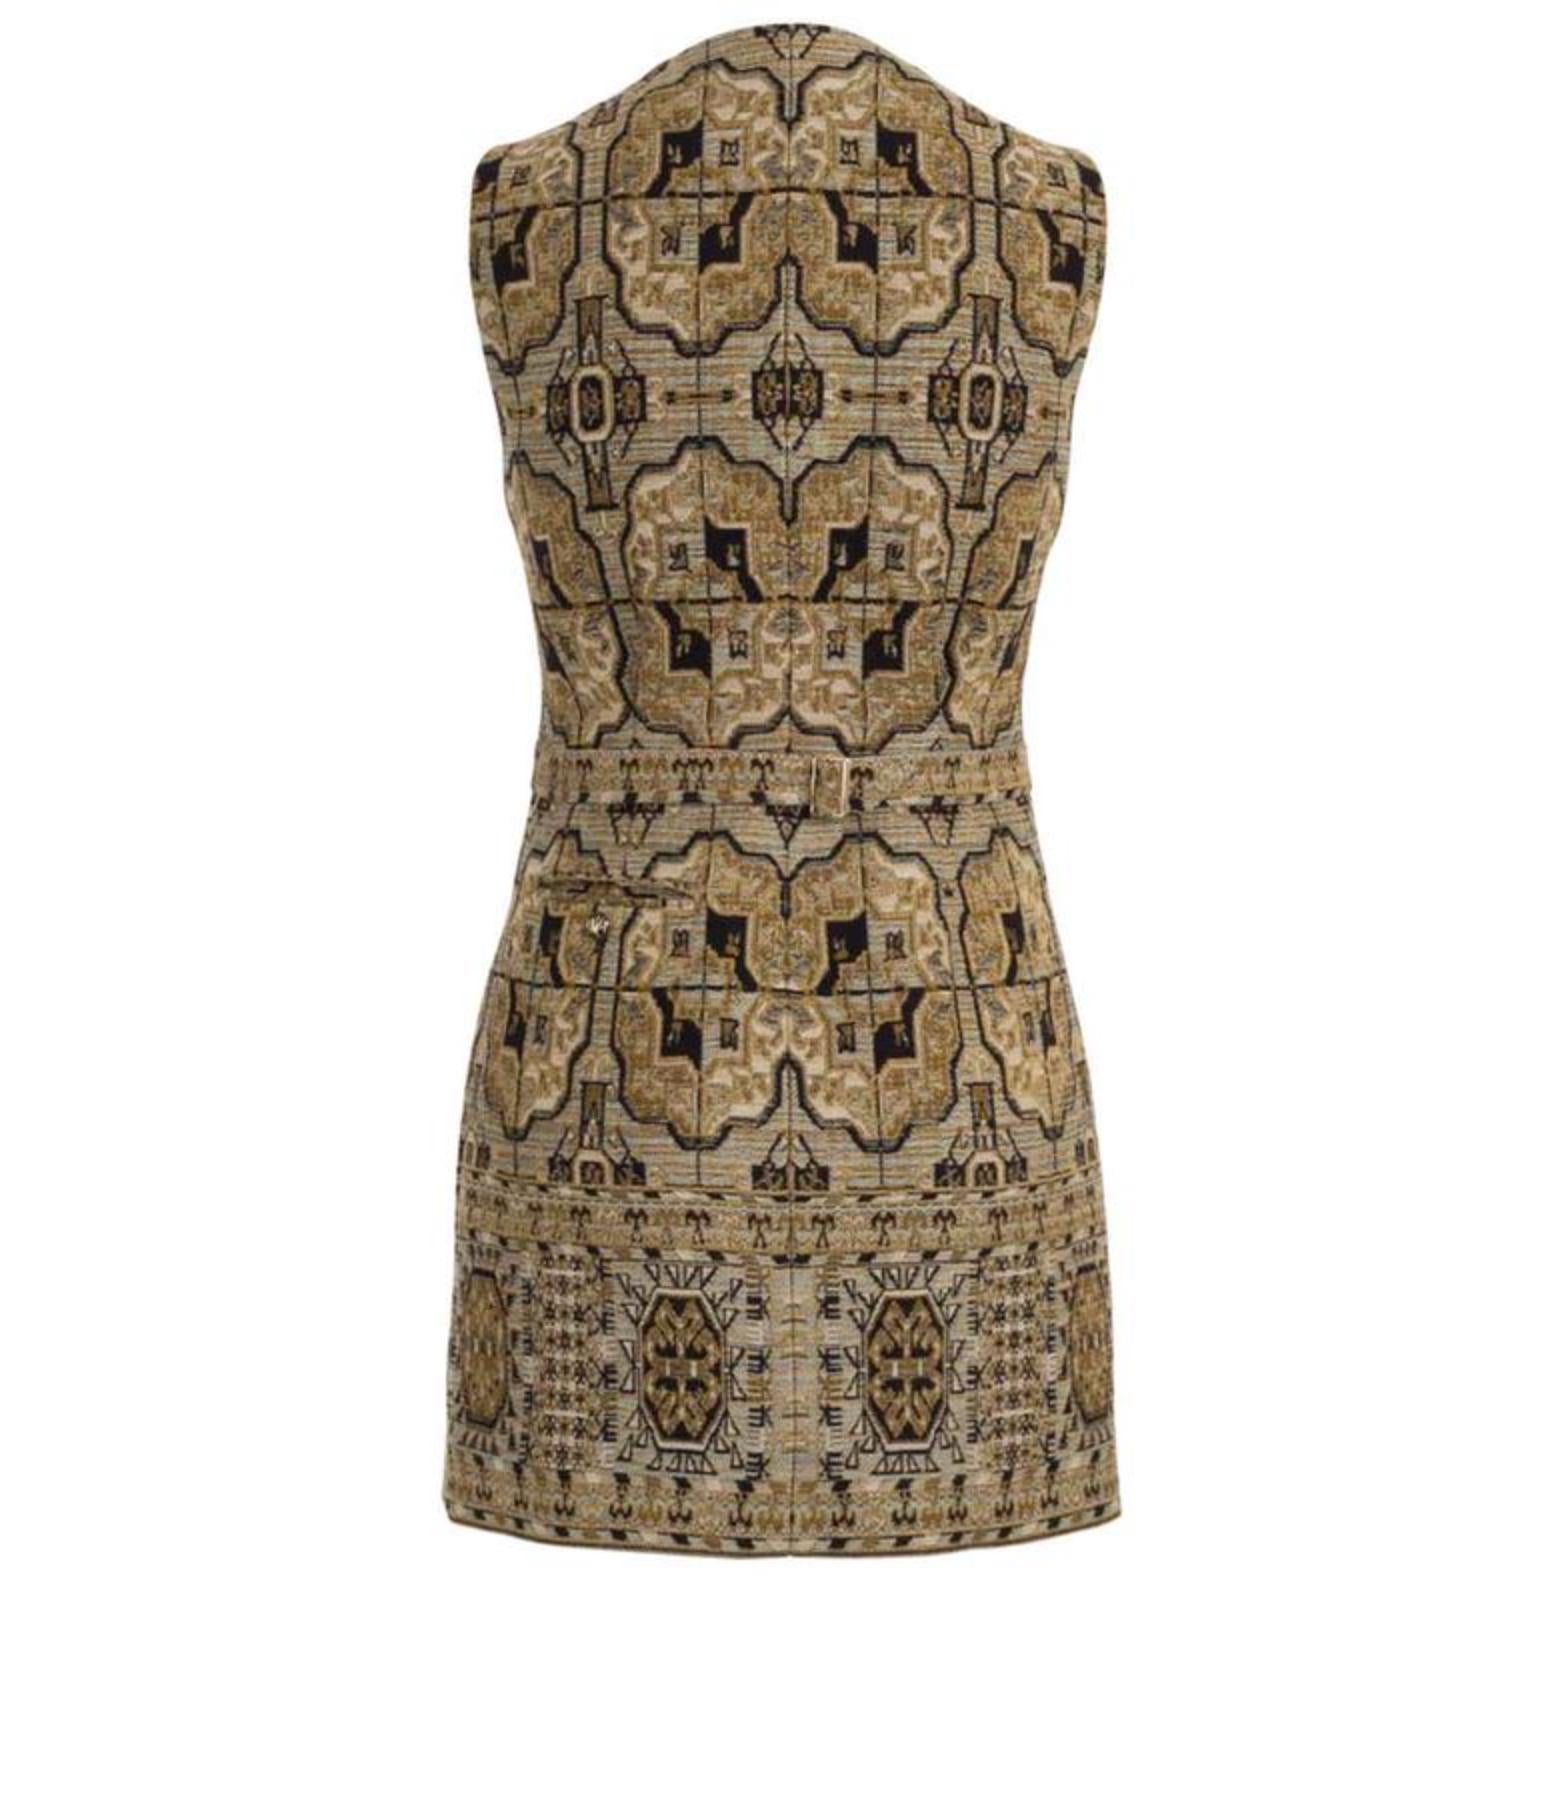 This Etro Fall 2019 Runway sleeveless black and beige jacquard slim fit button down mini dress / vest is made of blended wool and features two small flap pockets and buttons along the front. The lining is made of a cotton paisley pattern fabric.